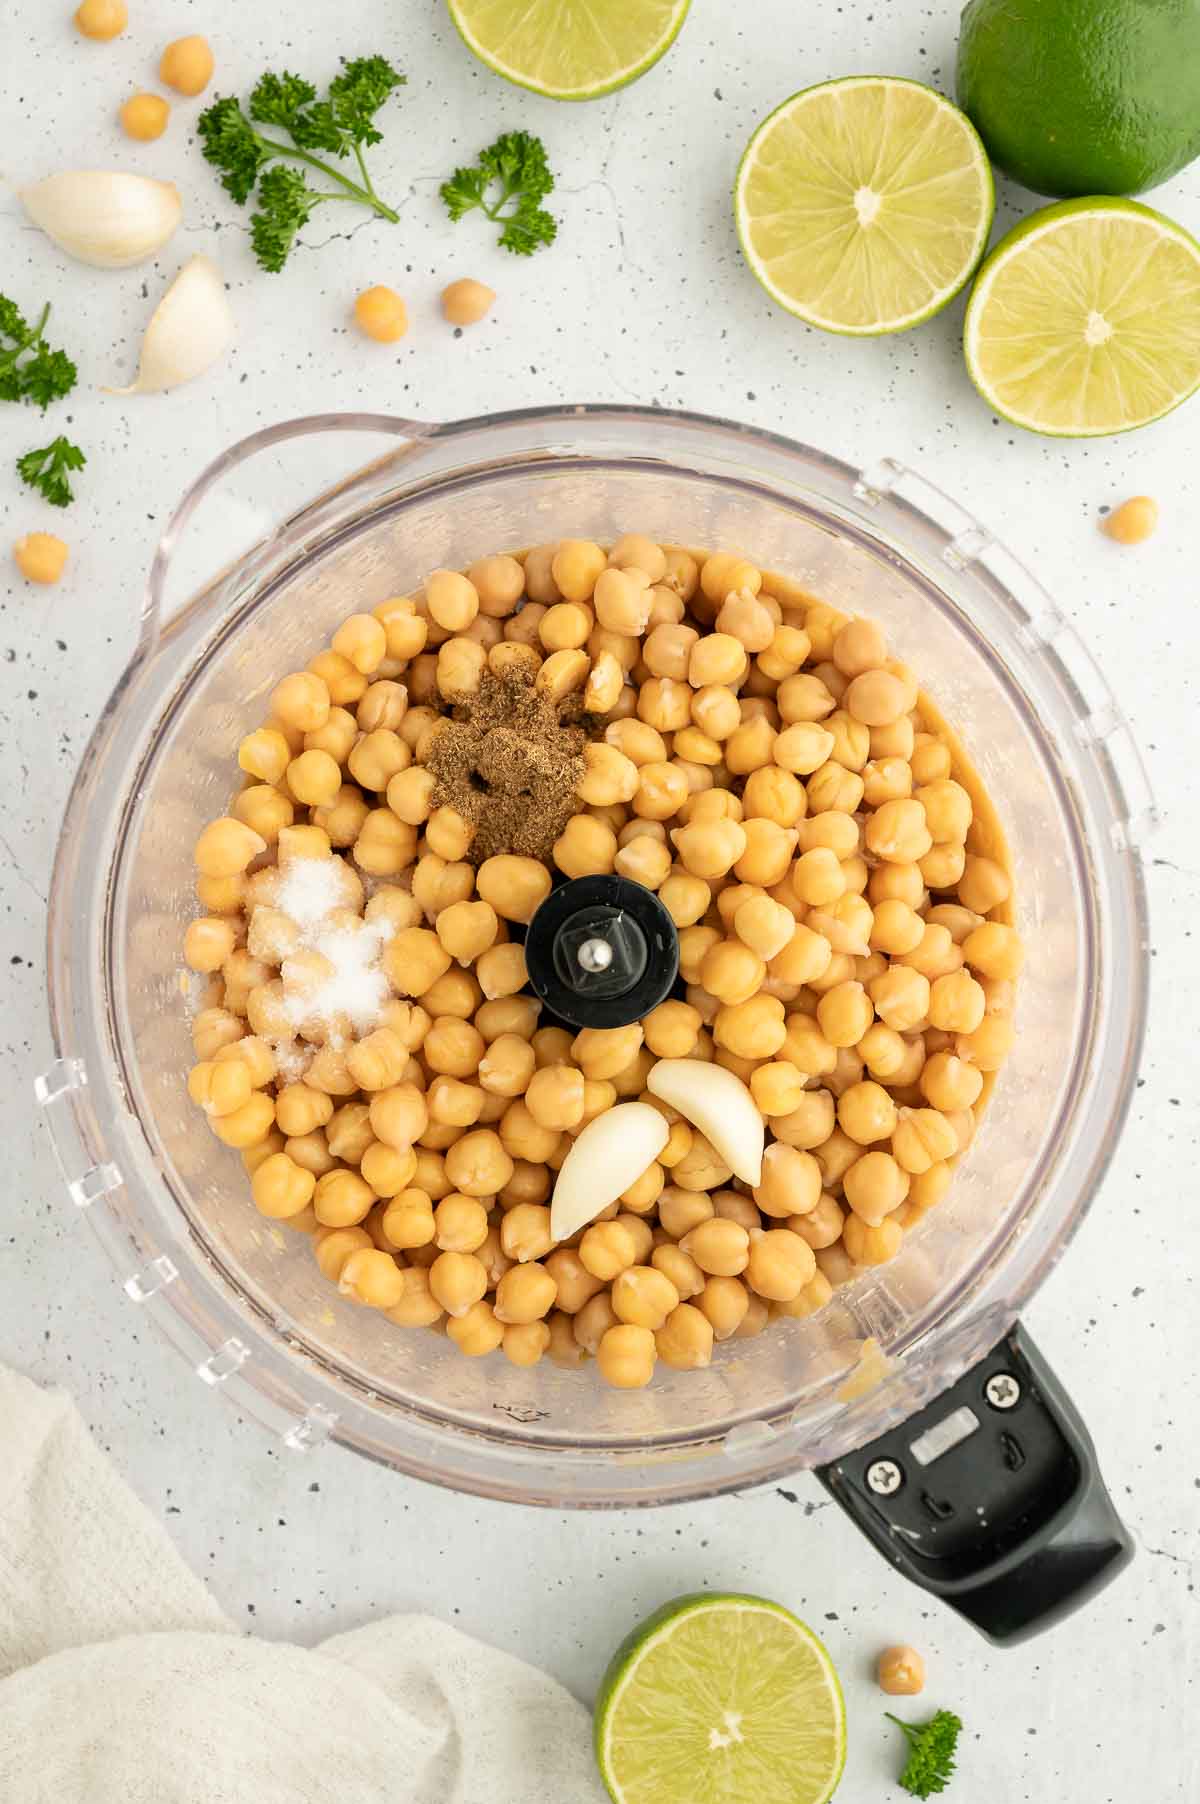 Chickpeas, spices, salt, and garlic in a food processor.